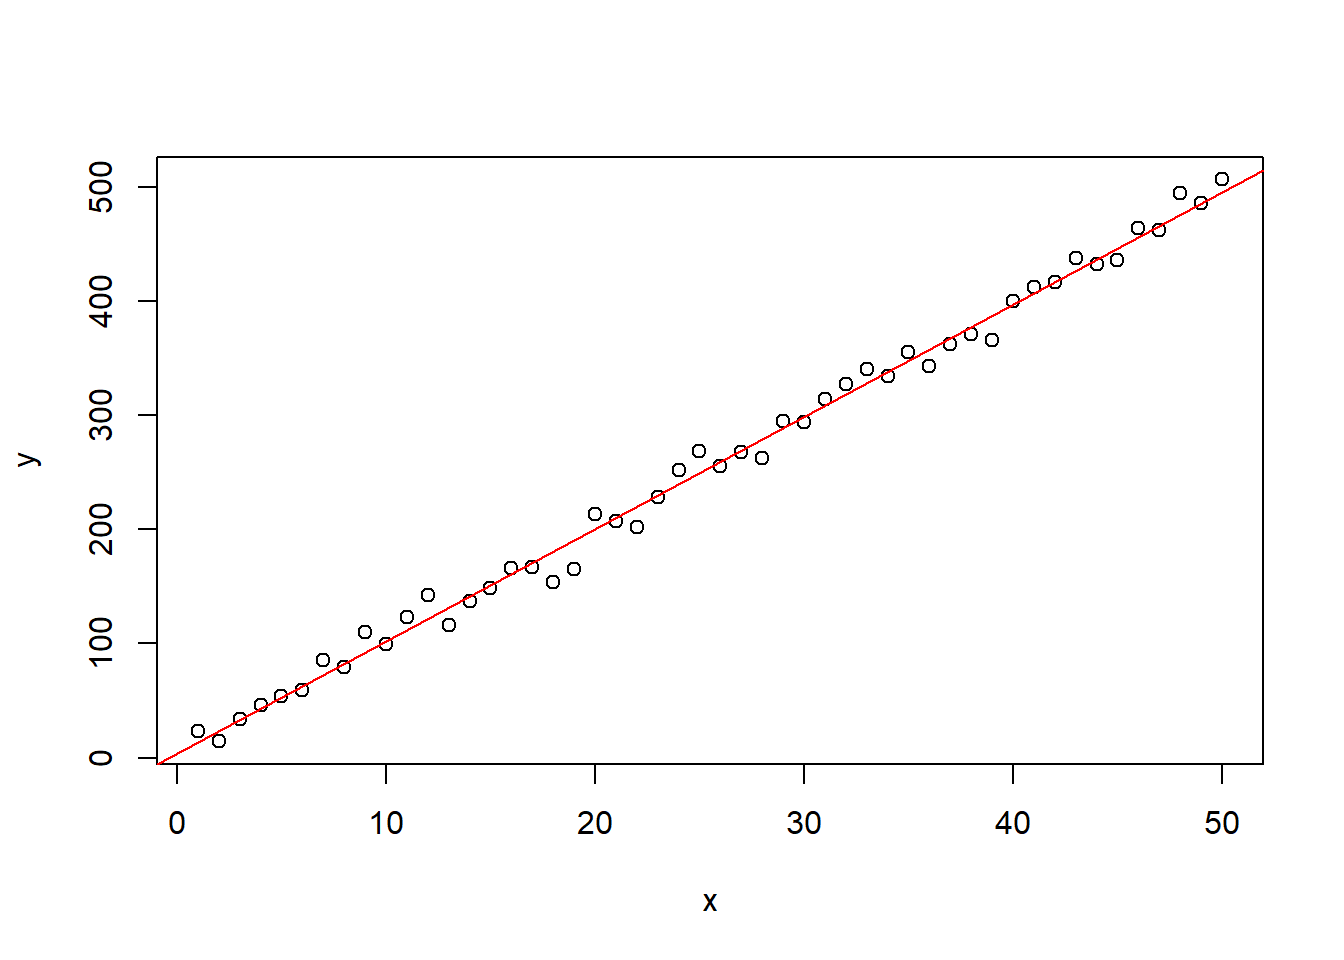 Same simple plot with simple regression line added.